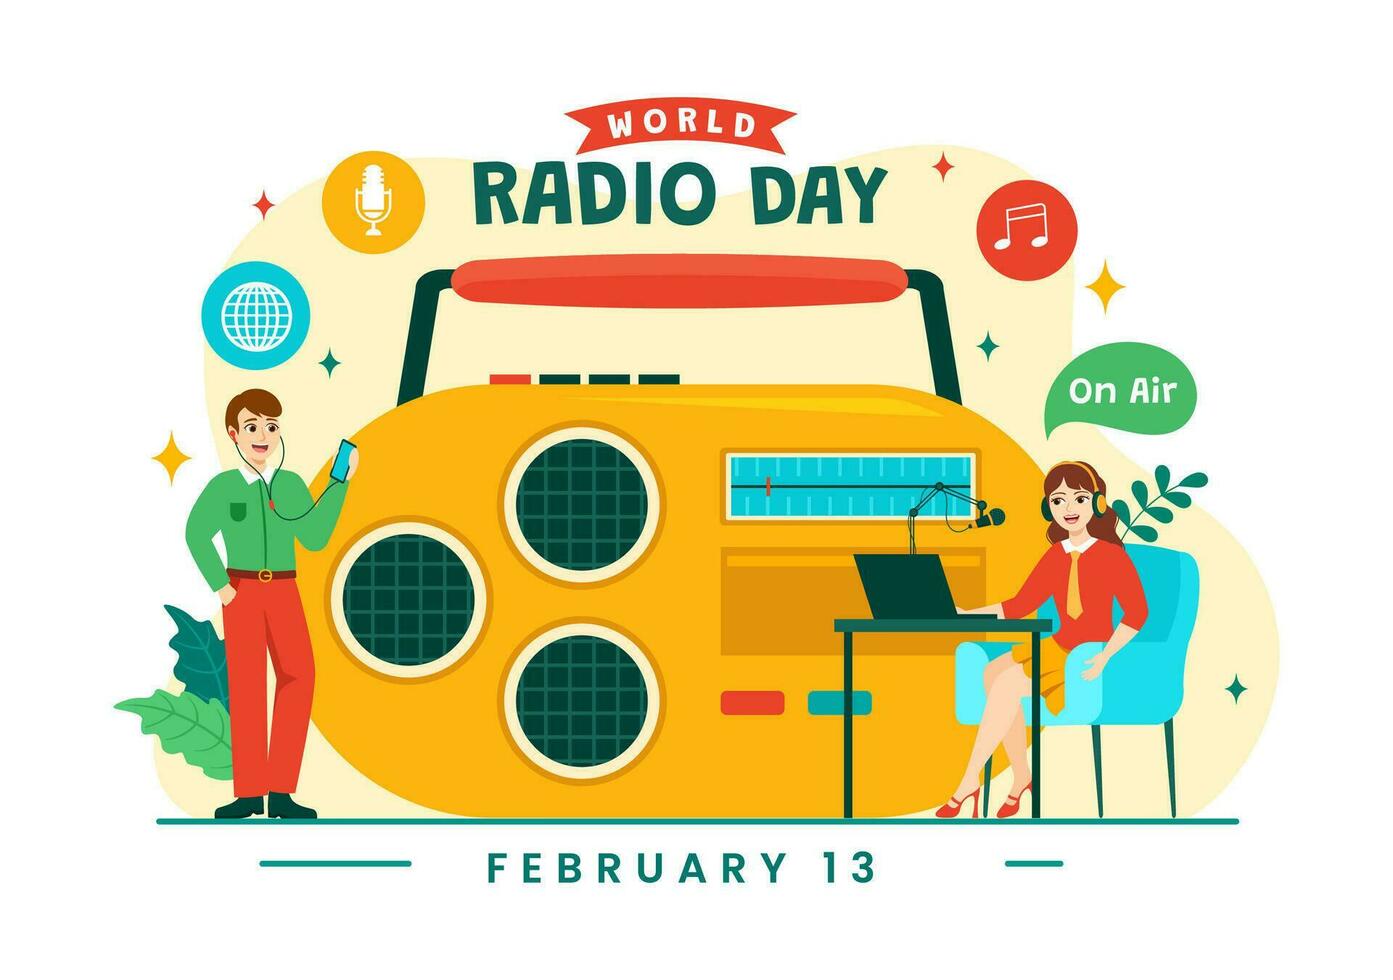 World Radio Day Vector Illustration on 13 February for Communication Media Used and Listening Audience in Flat Cartoon Background Design